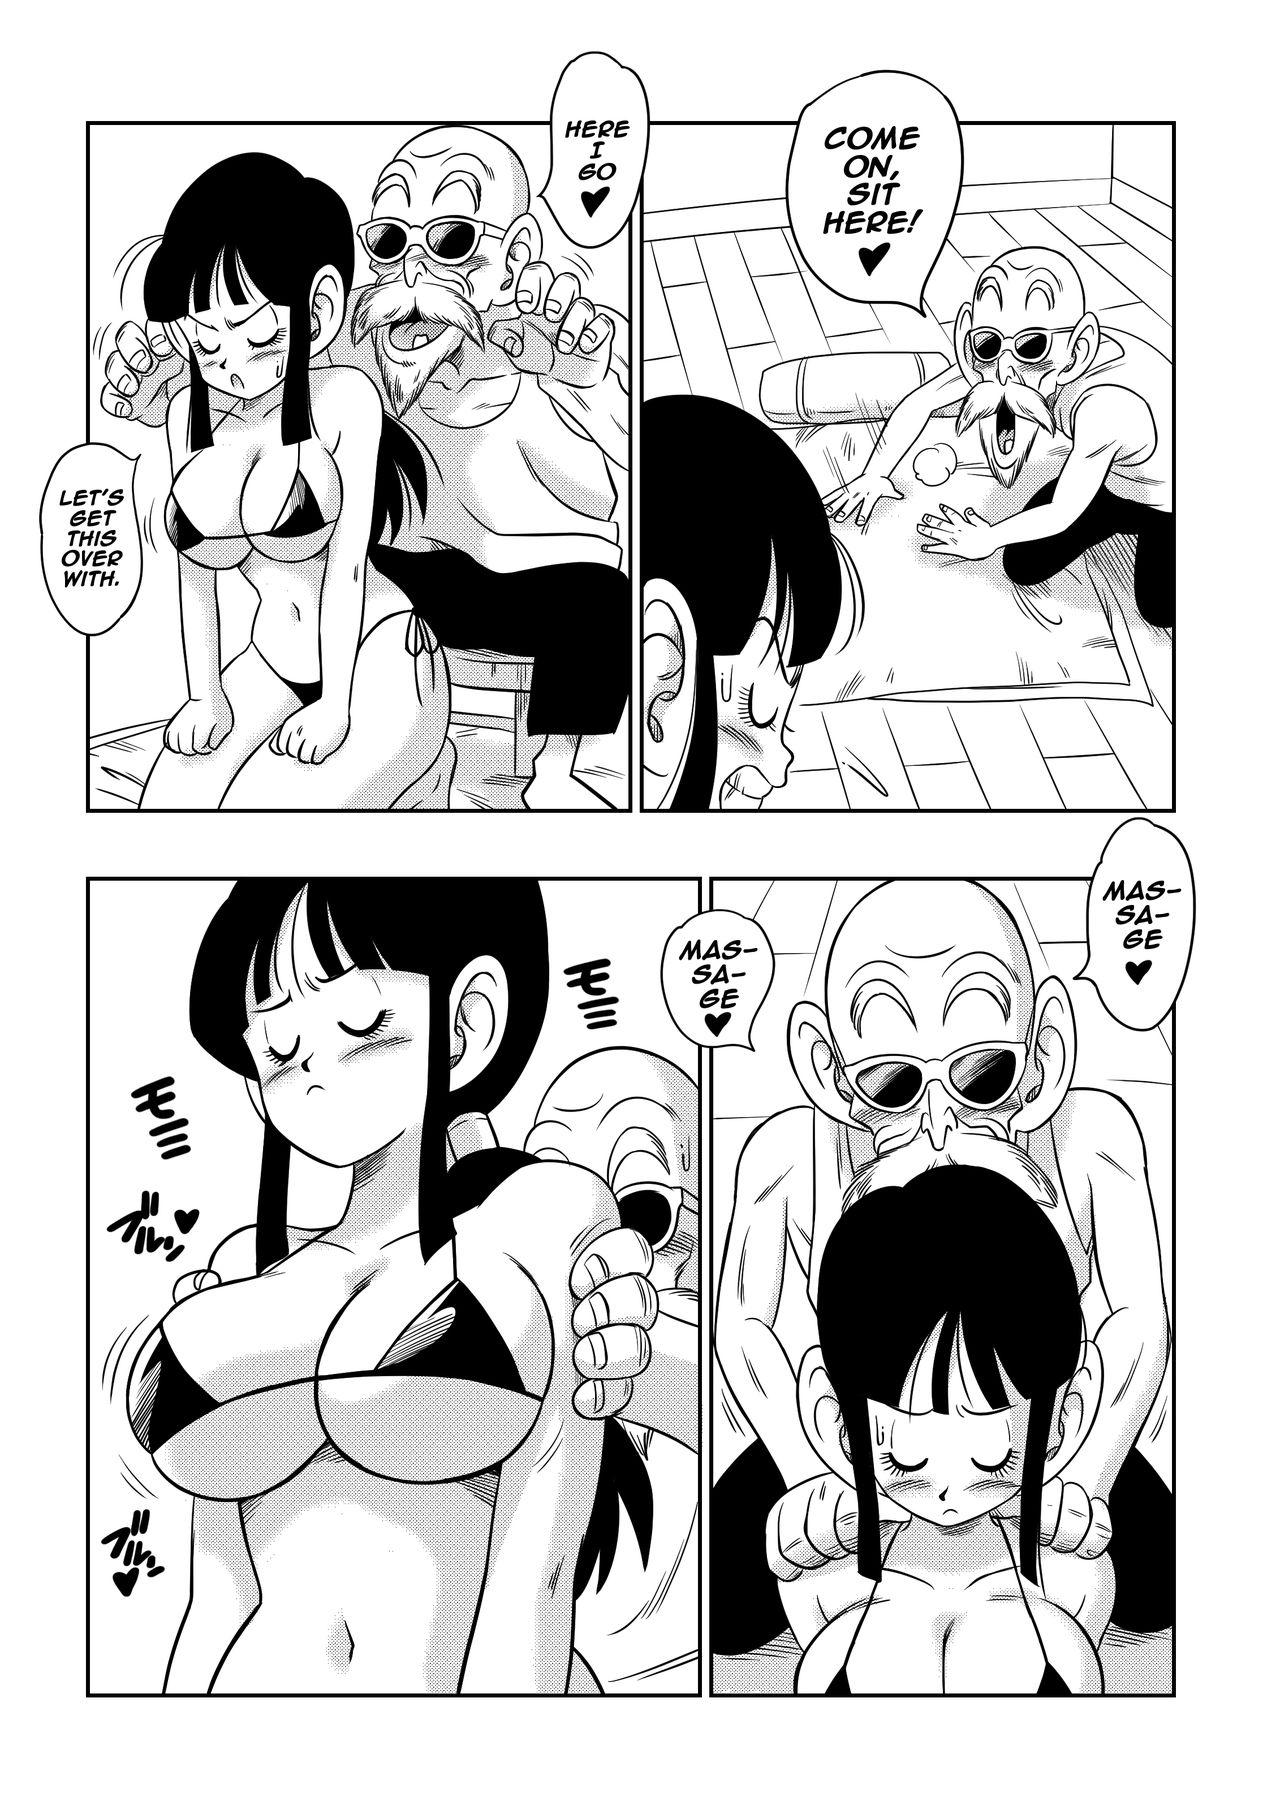 Bigcock "An Ancient Tradition" - Young Wife is Harassed! - Dragon ball z Gay Blackhair - Page 8